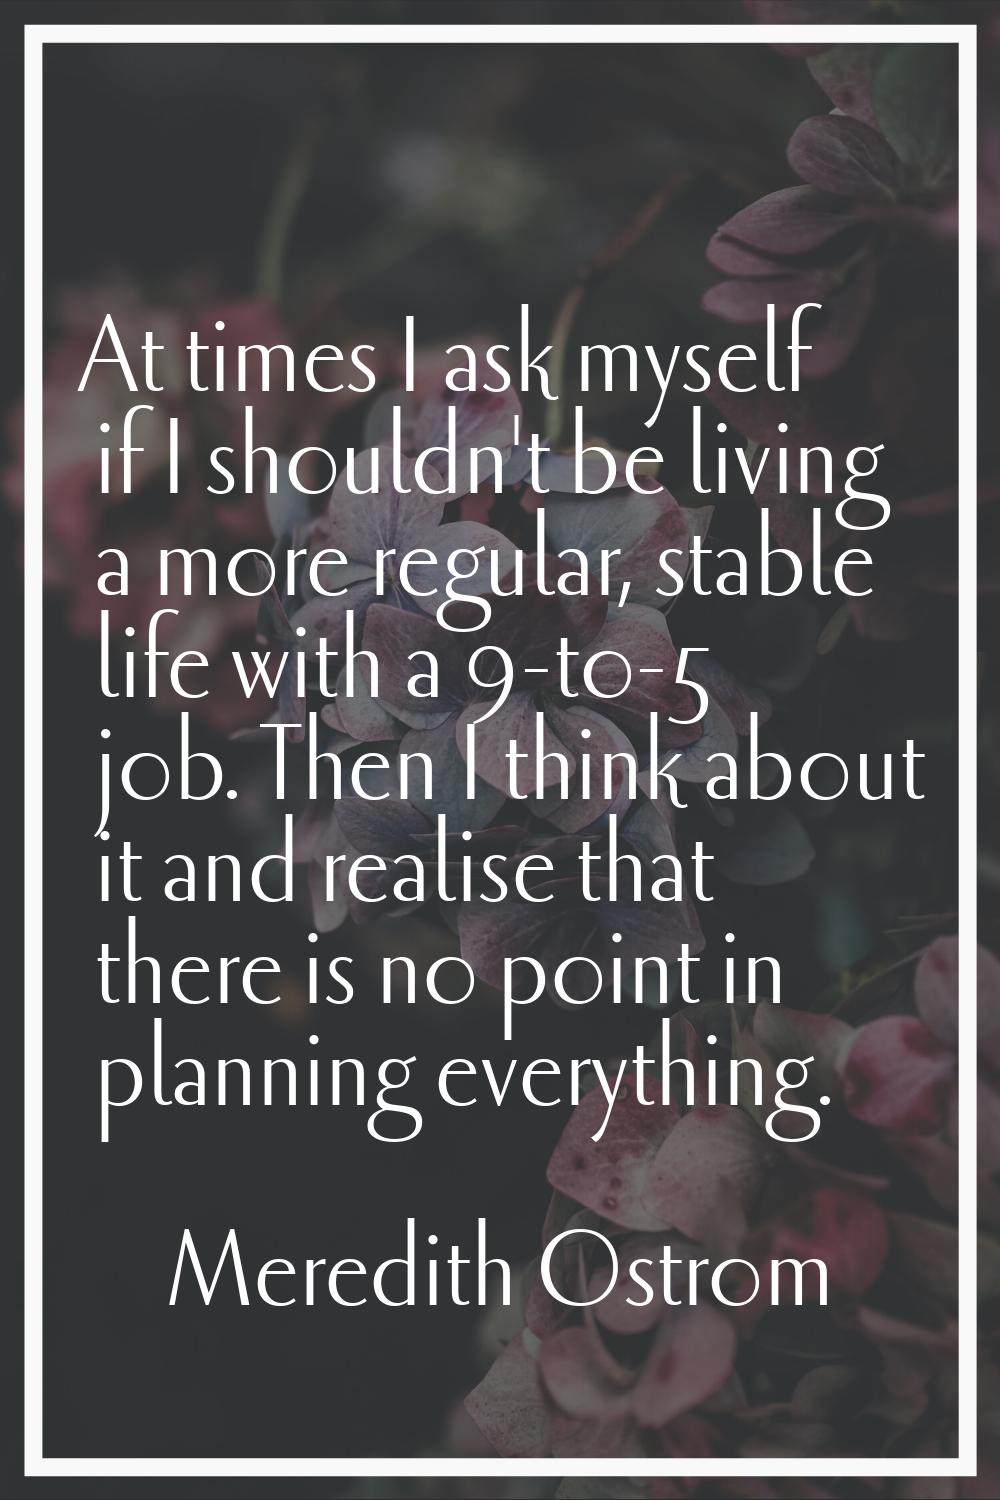 At times I ask myself if I shouldn't be living a more regular, stable life with a 9-to-5 job. Then 